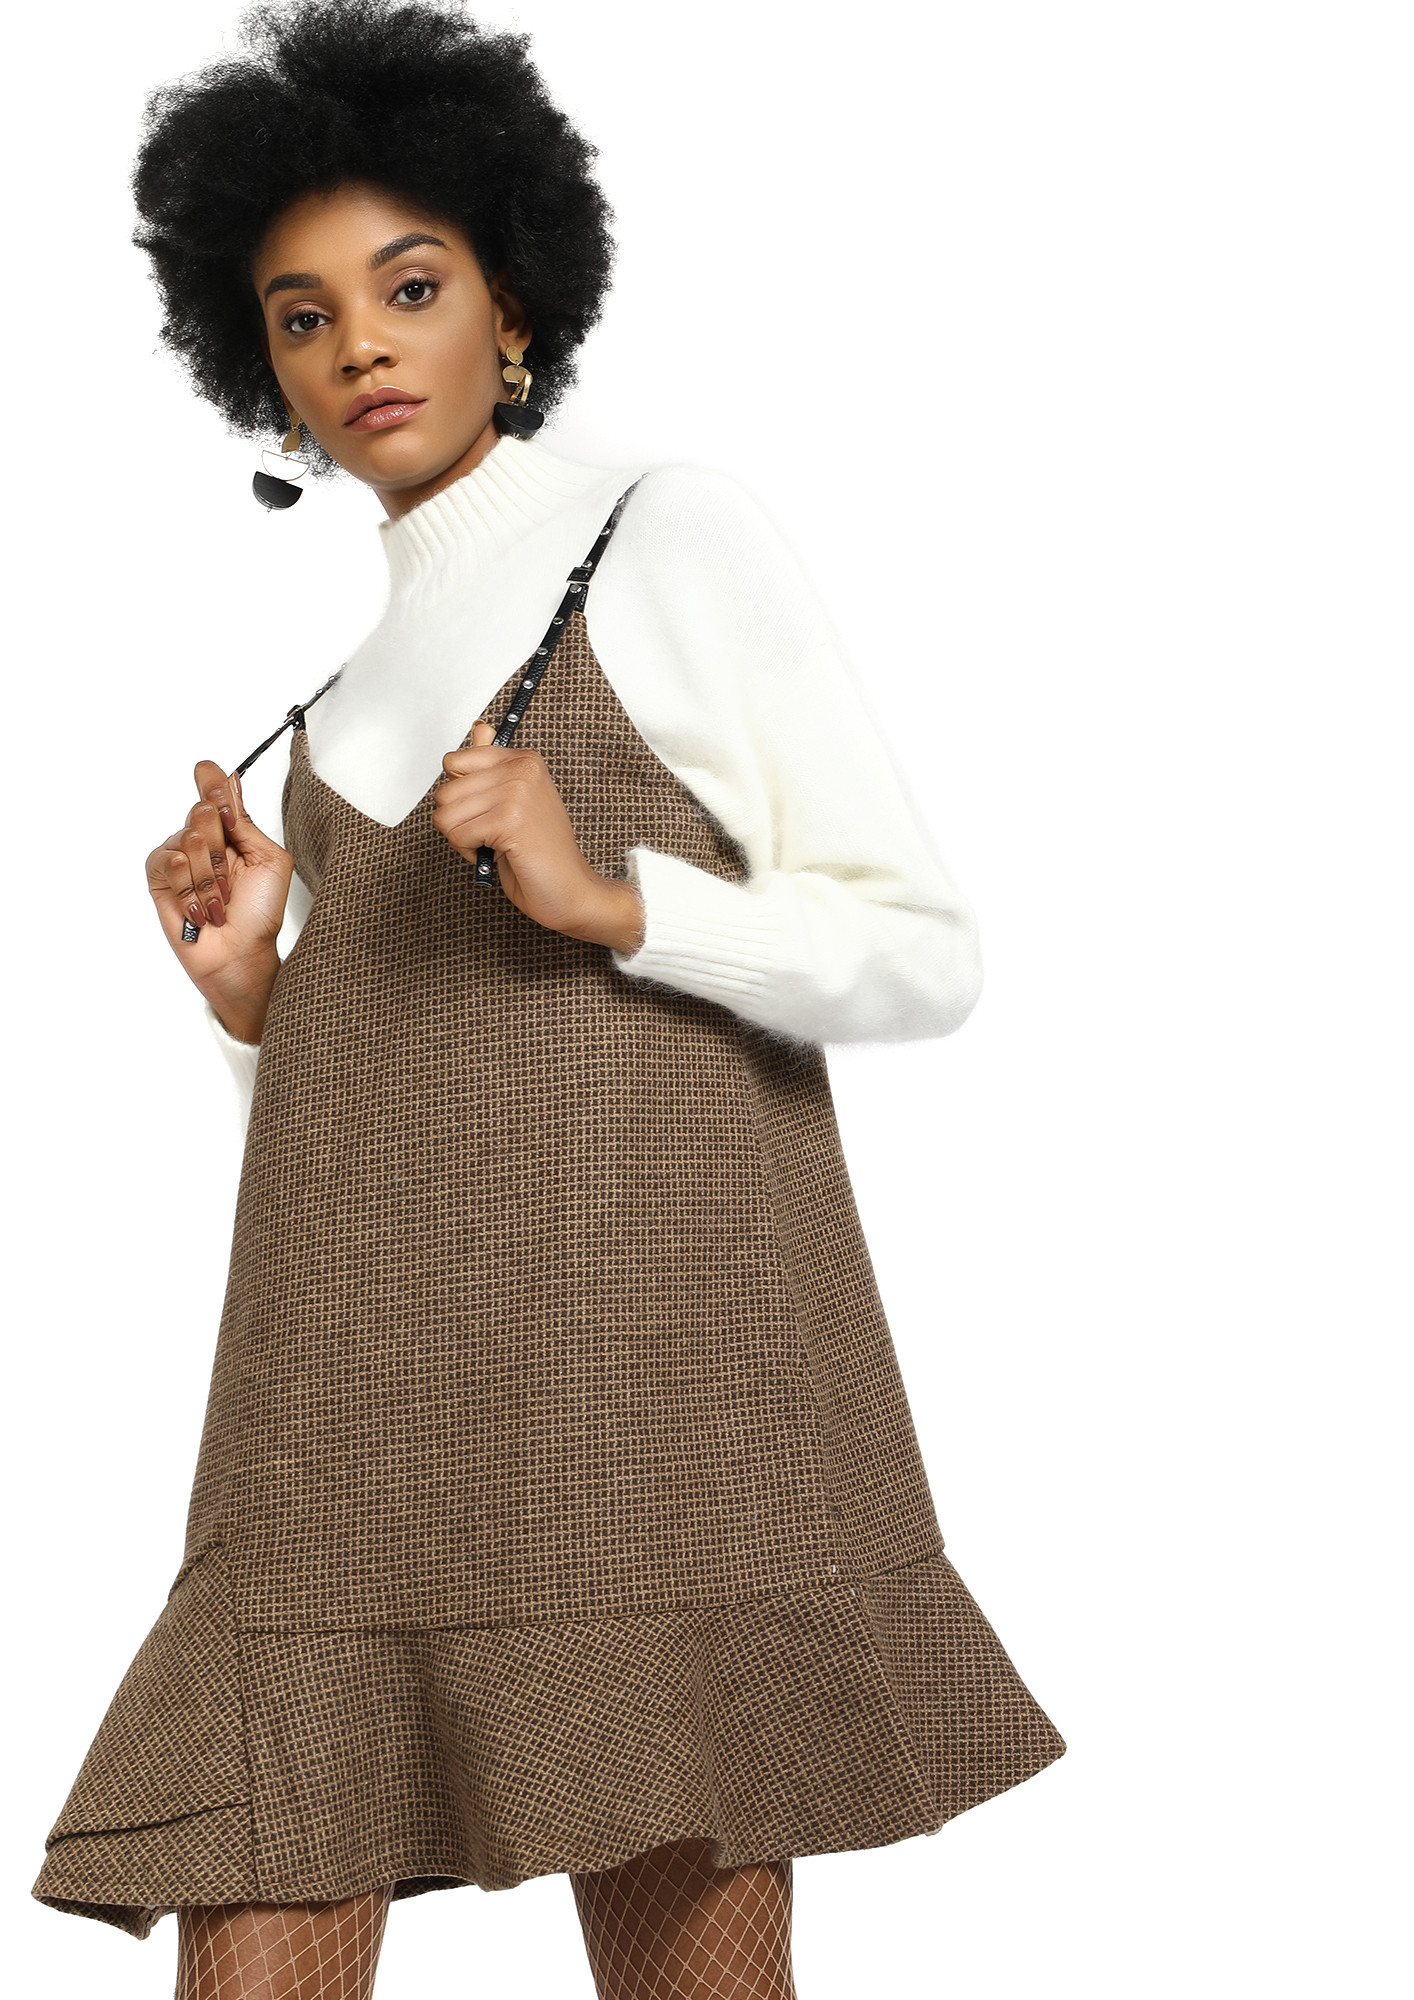 ALWAYS IN A RUSH BROWN PINAFORE DRESS